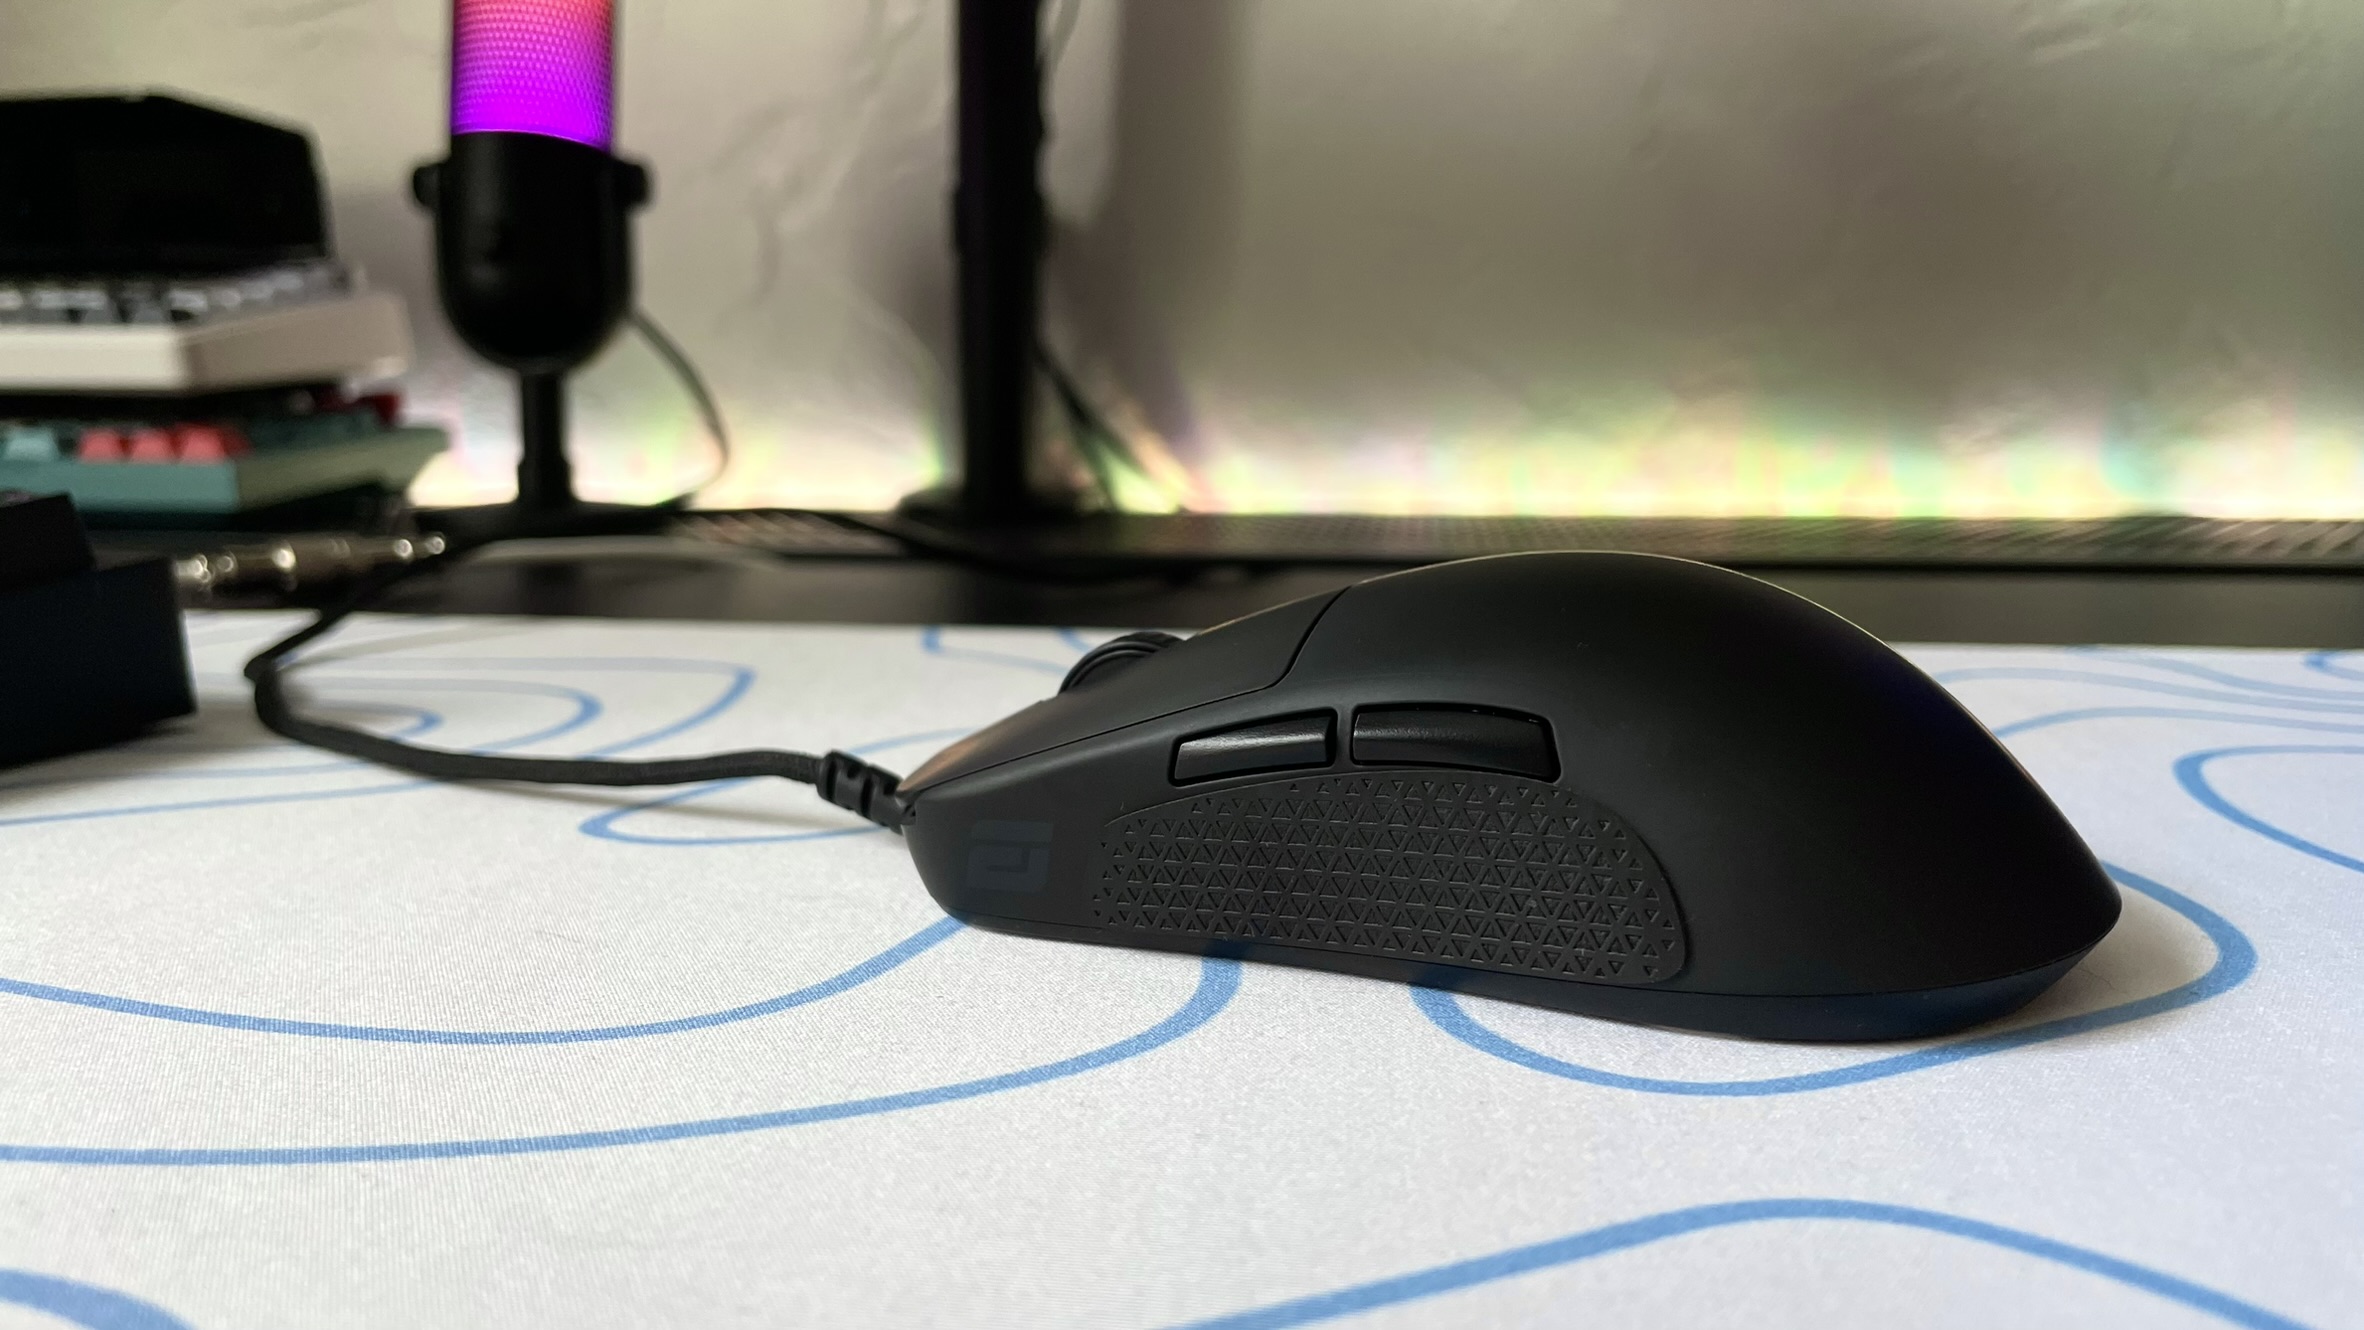 Endgame Gear OP1 8k gaming mouse with grip tape